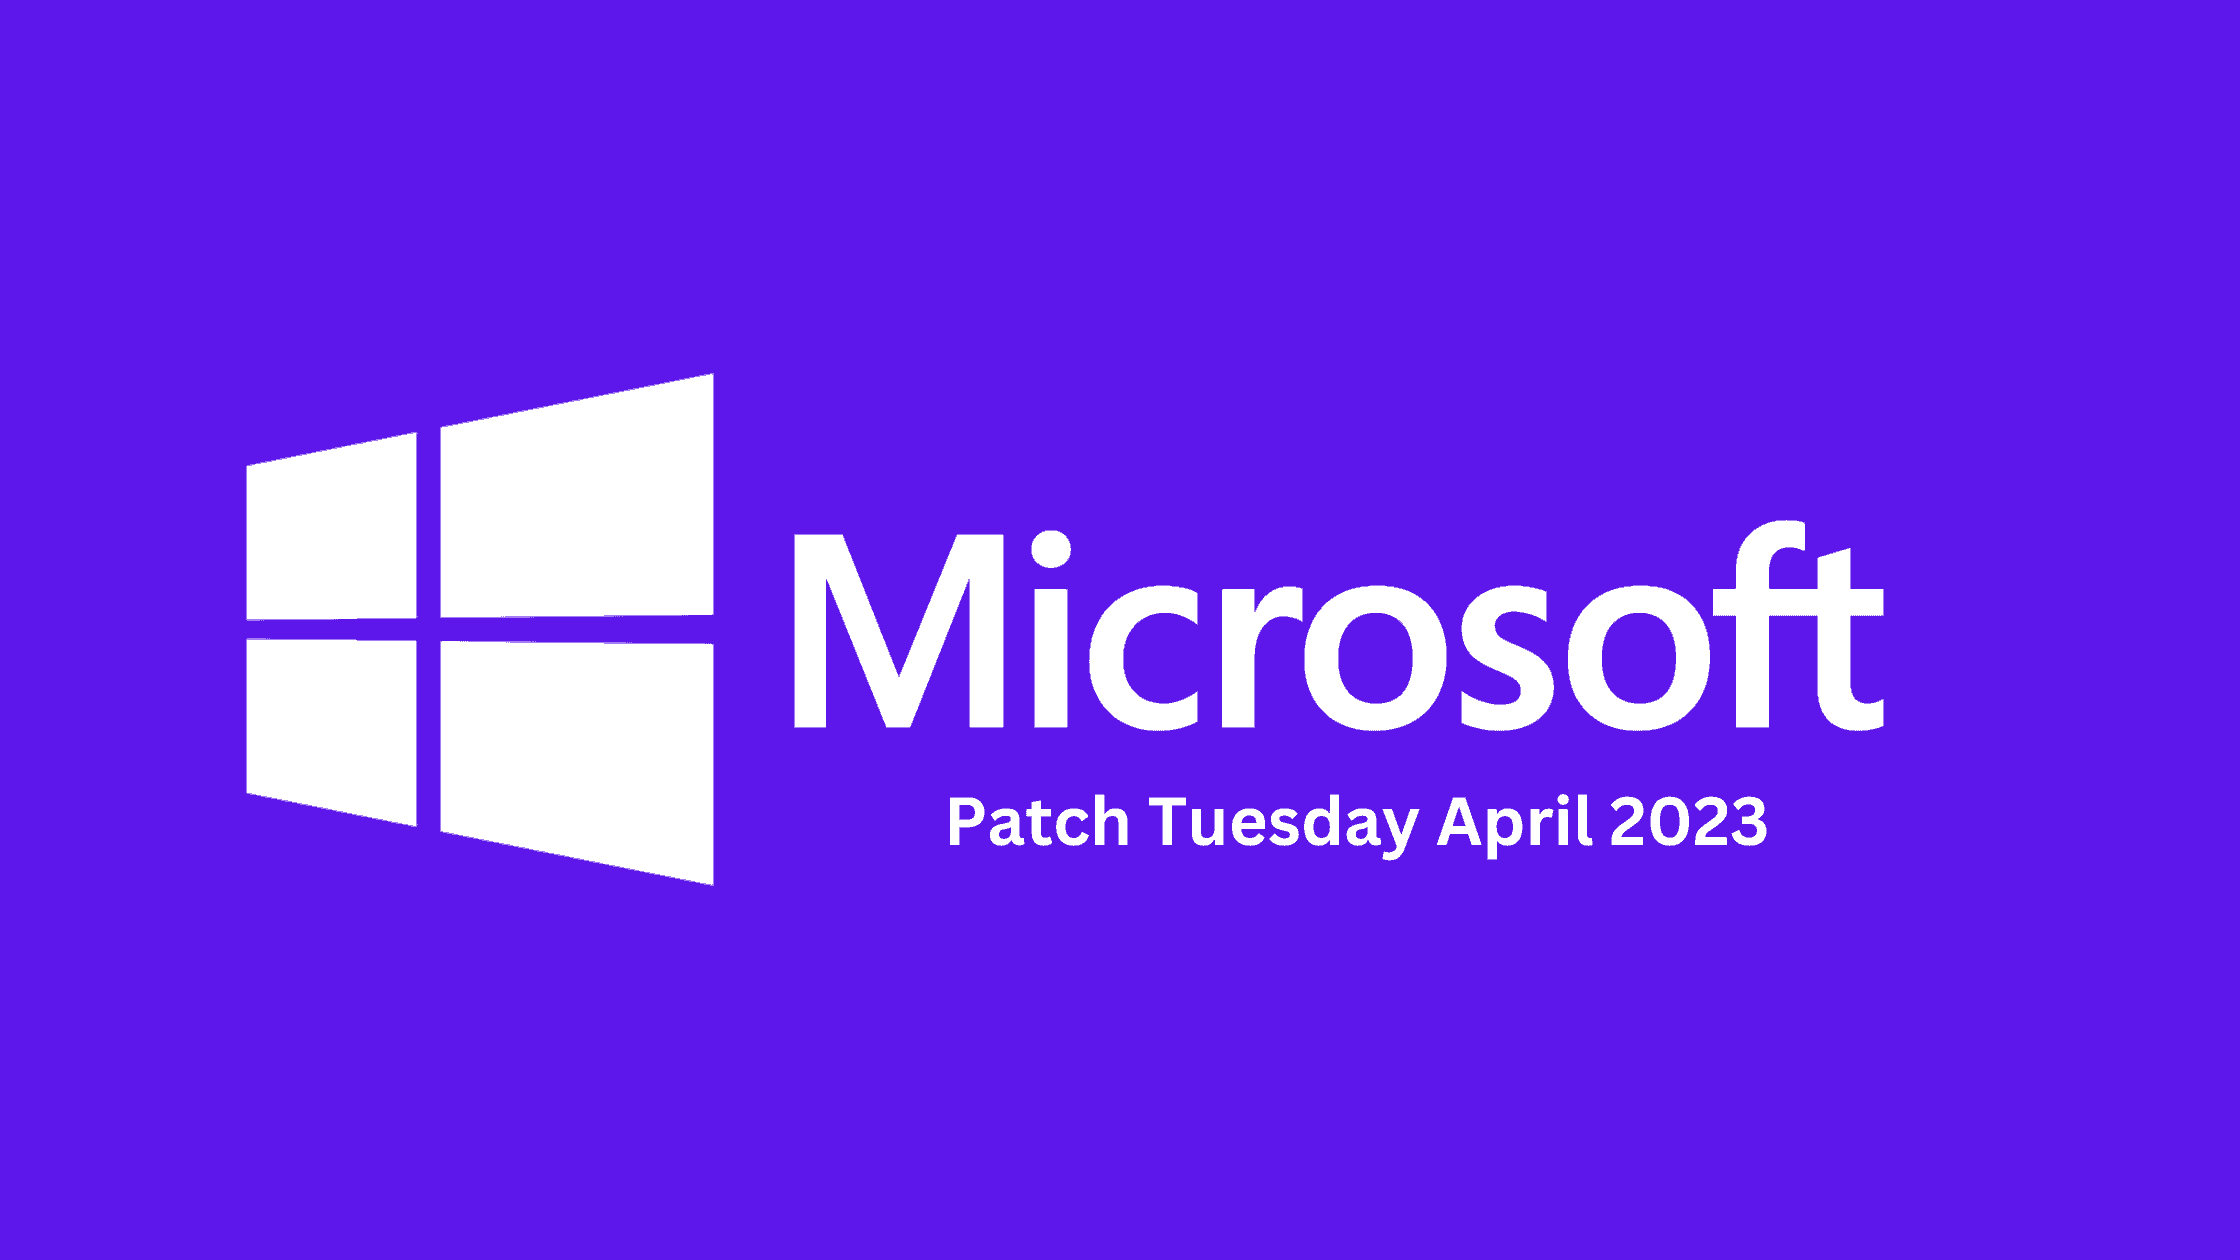 Breaking Down The Latest April 2023 Patch Tuesday Report